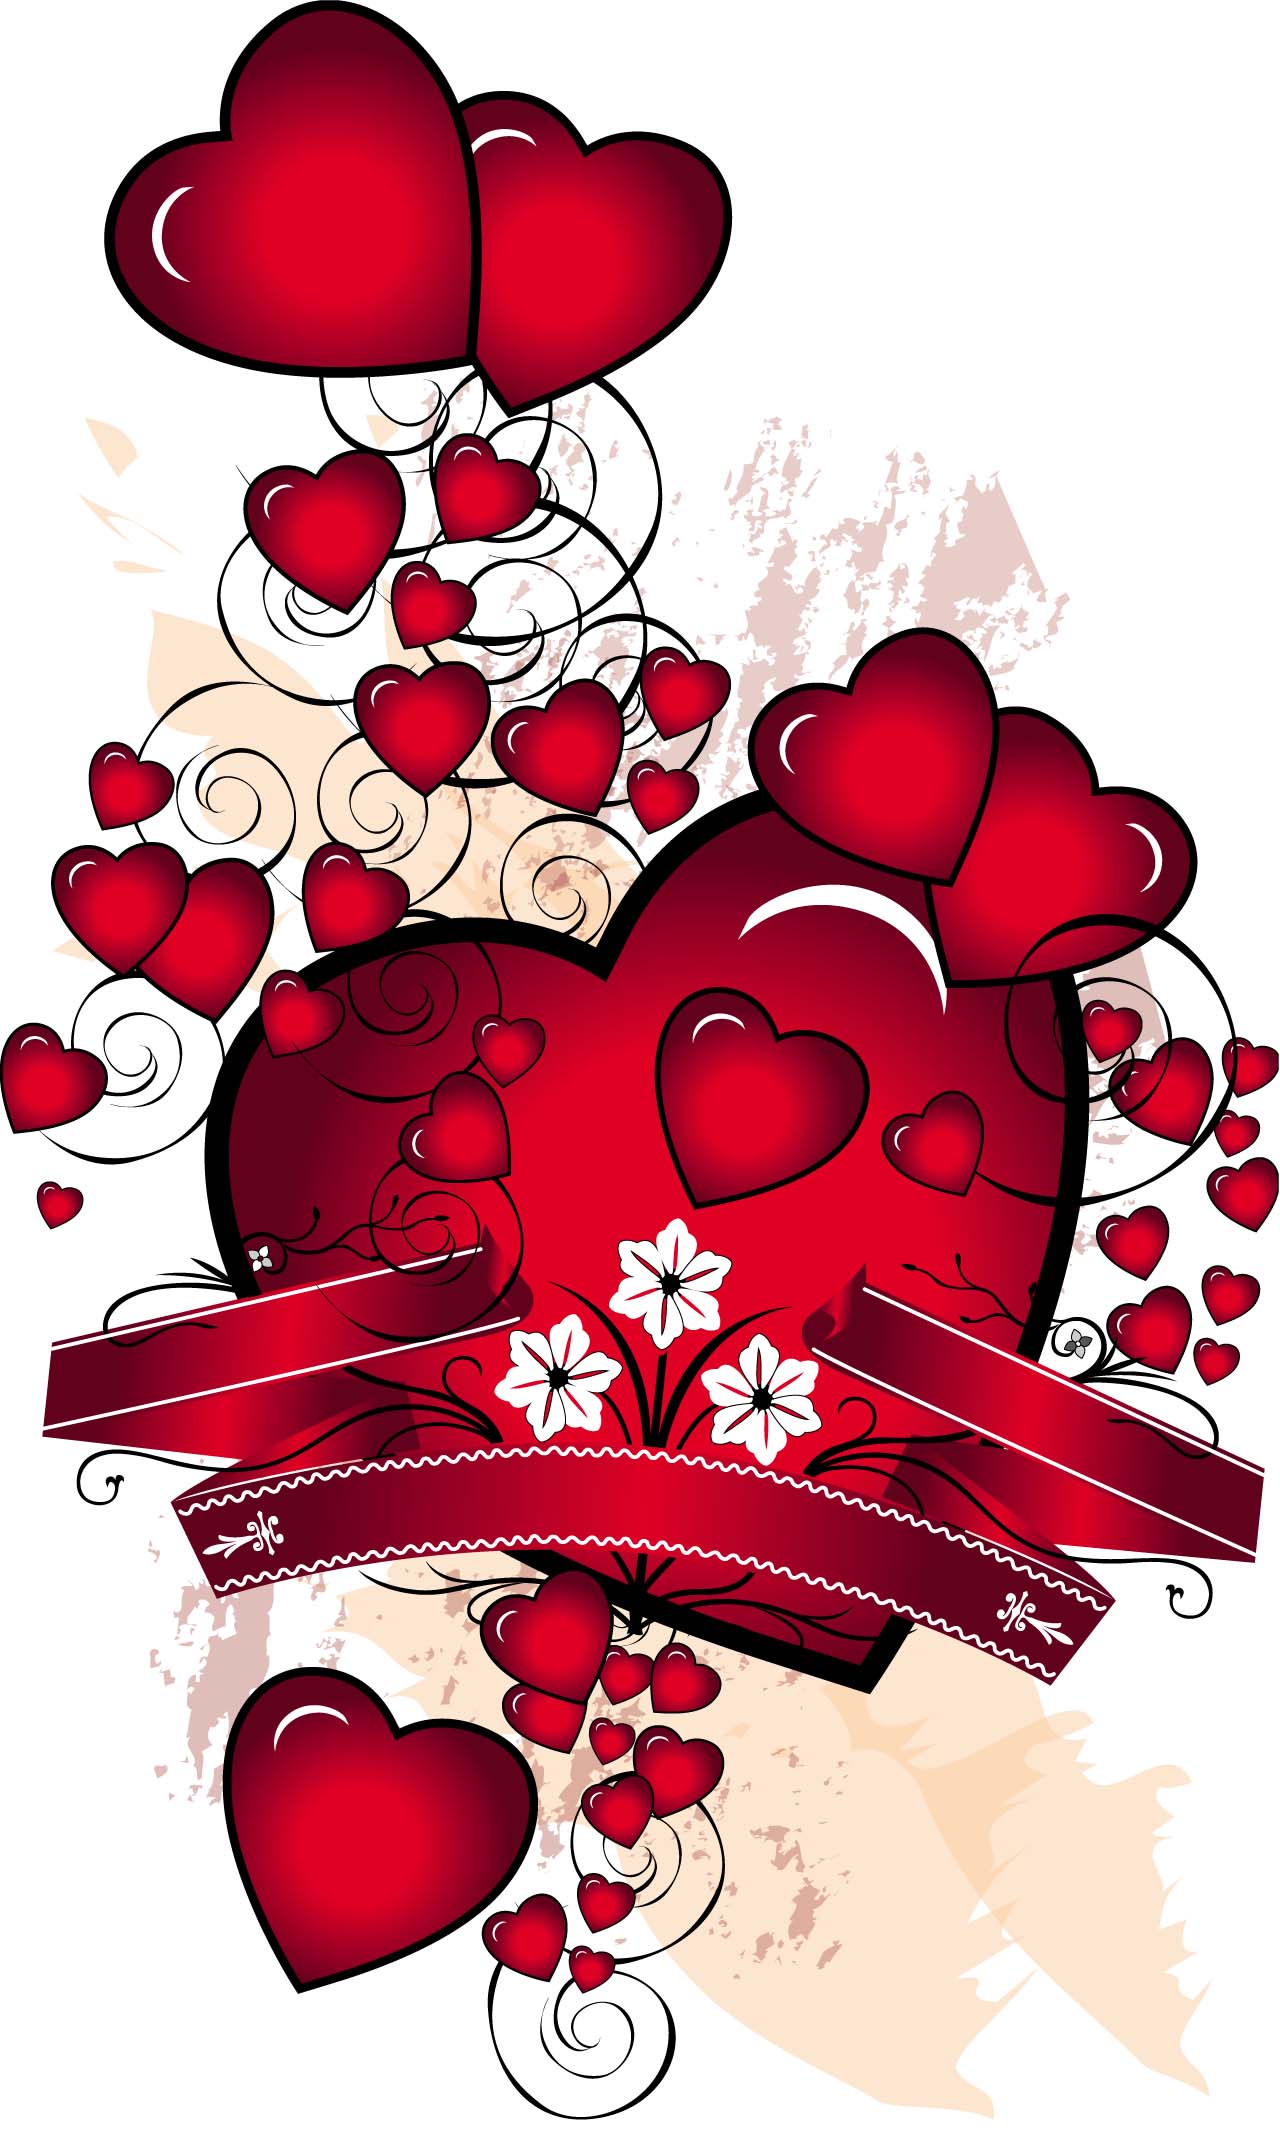 Red hearts and ribbons card vector